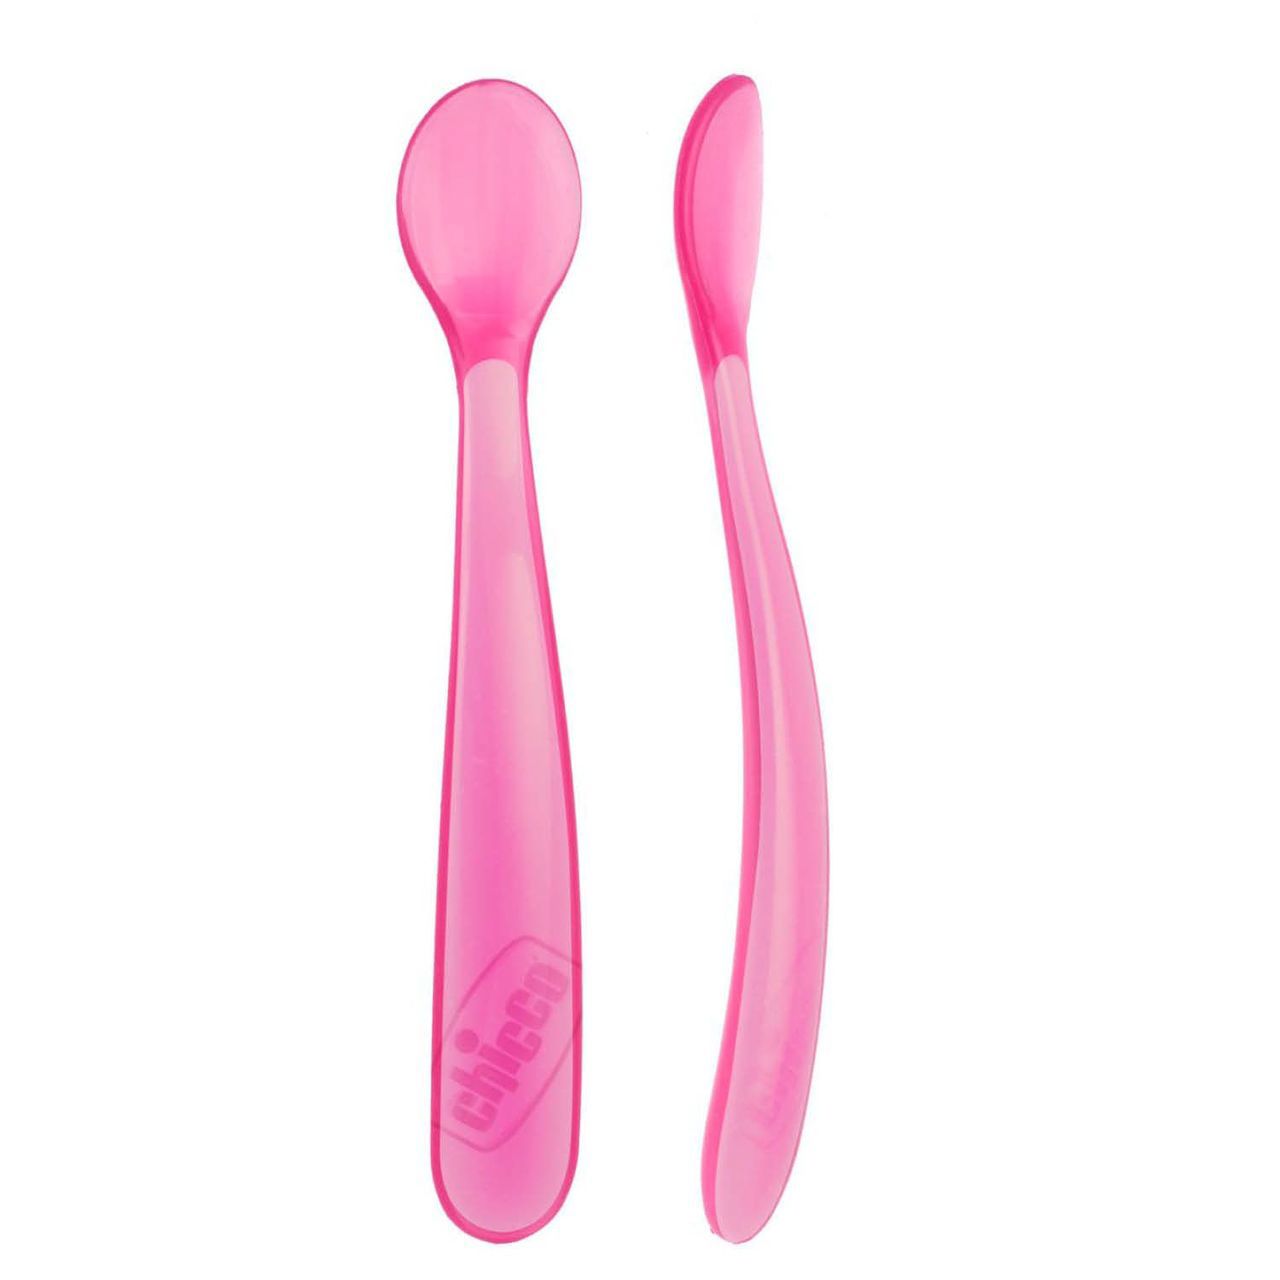 Chicco Cuillère en silicone Rose 6m+